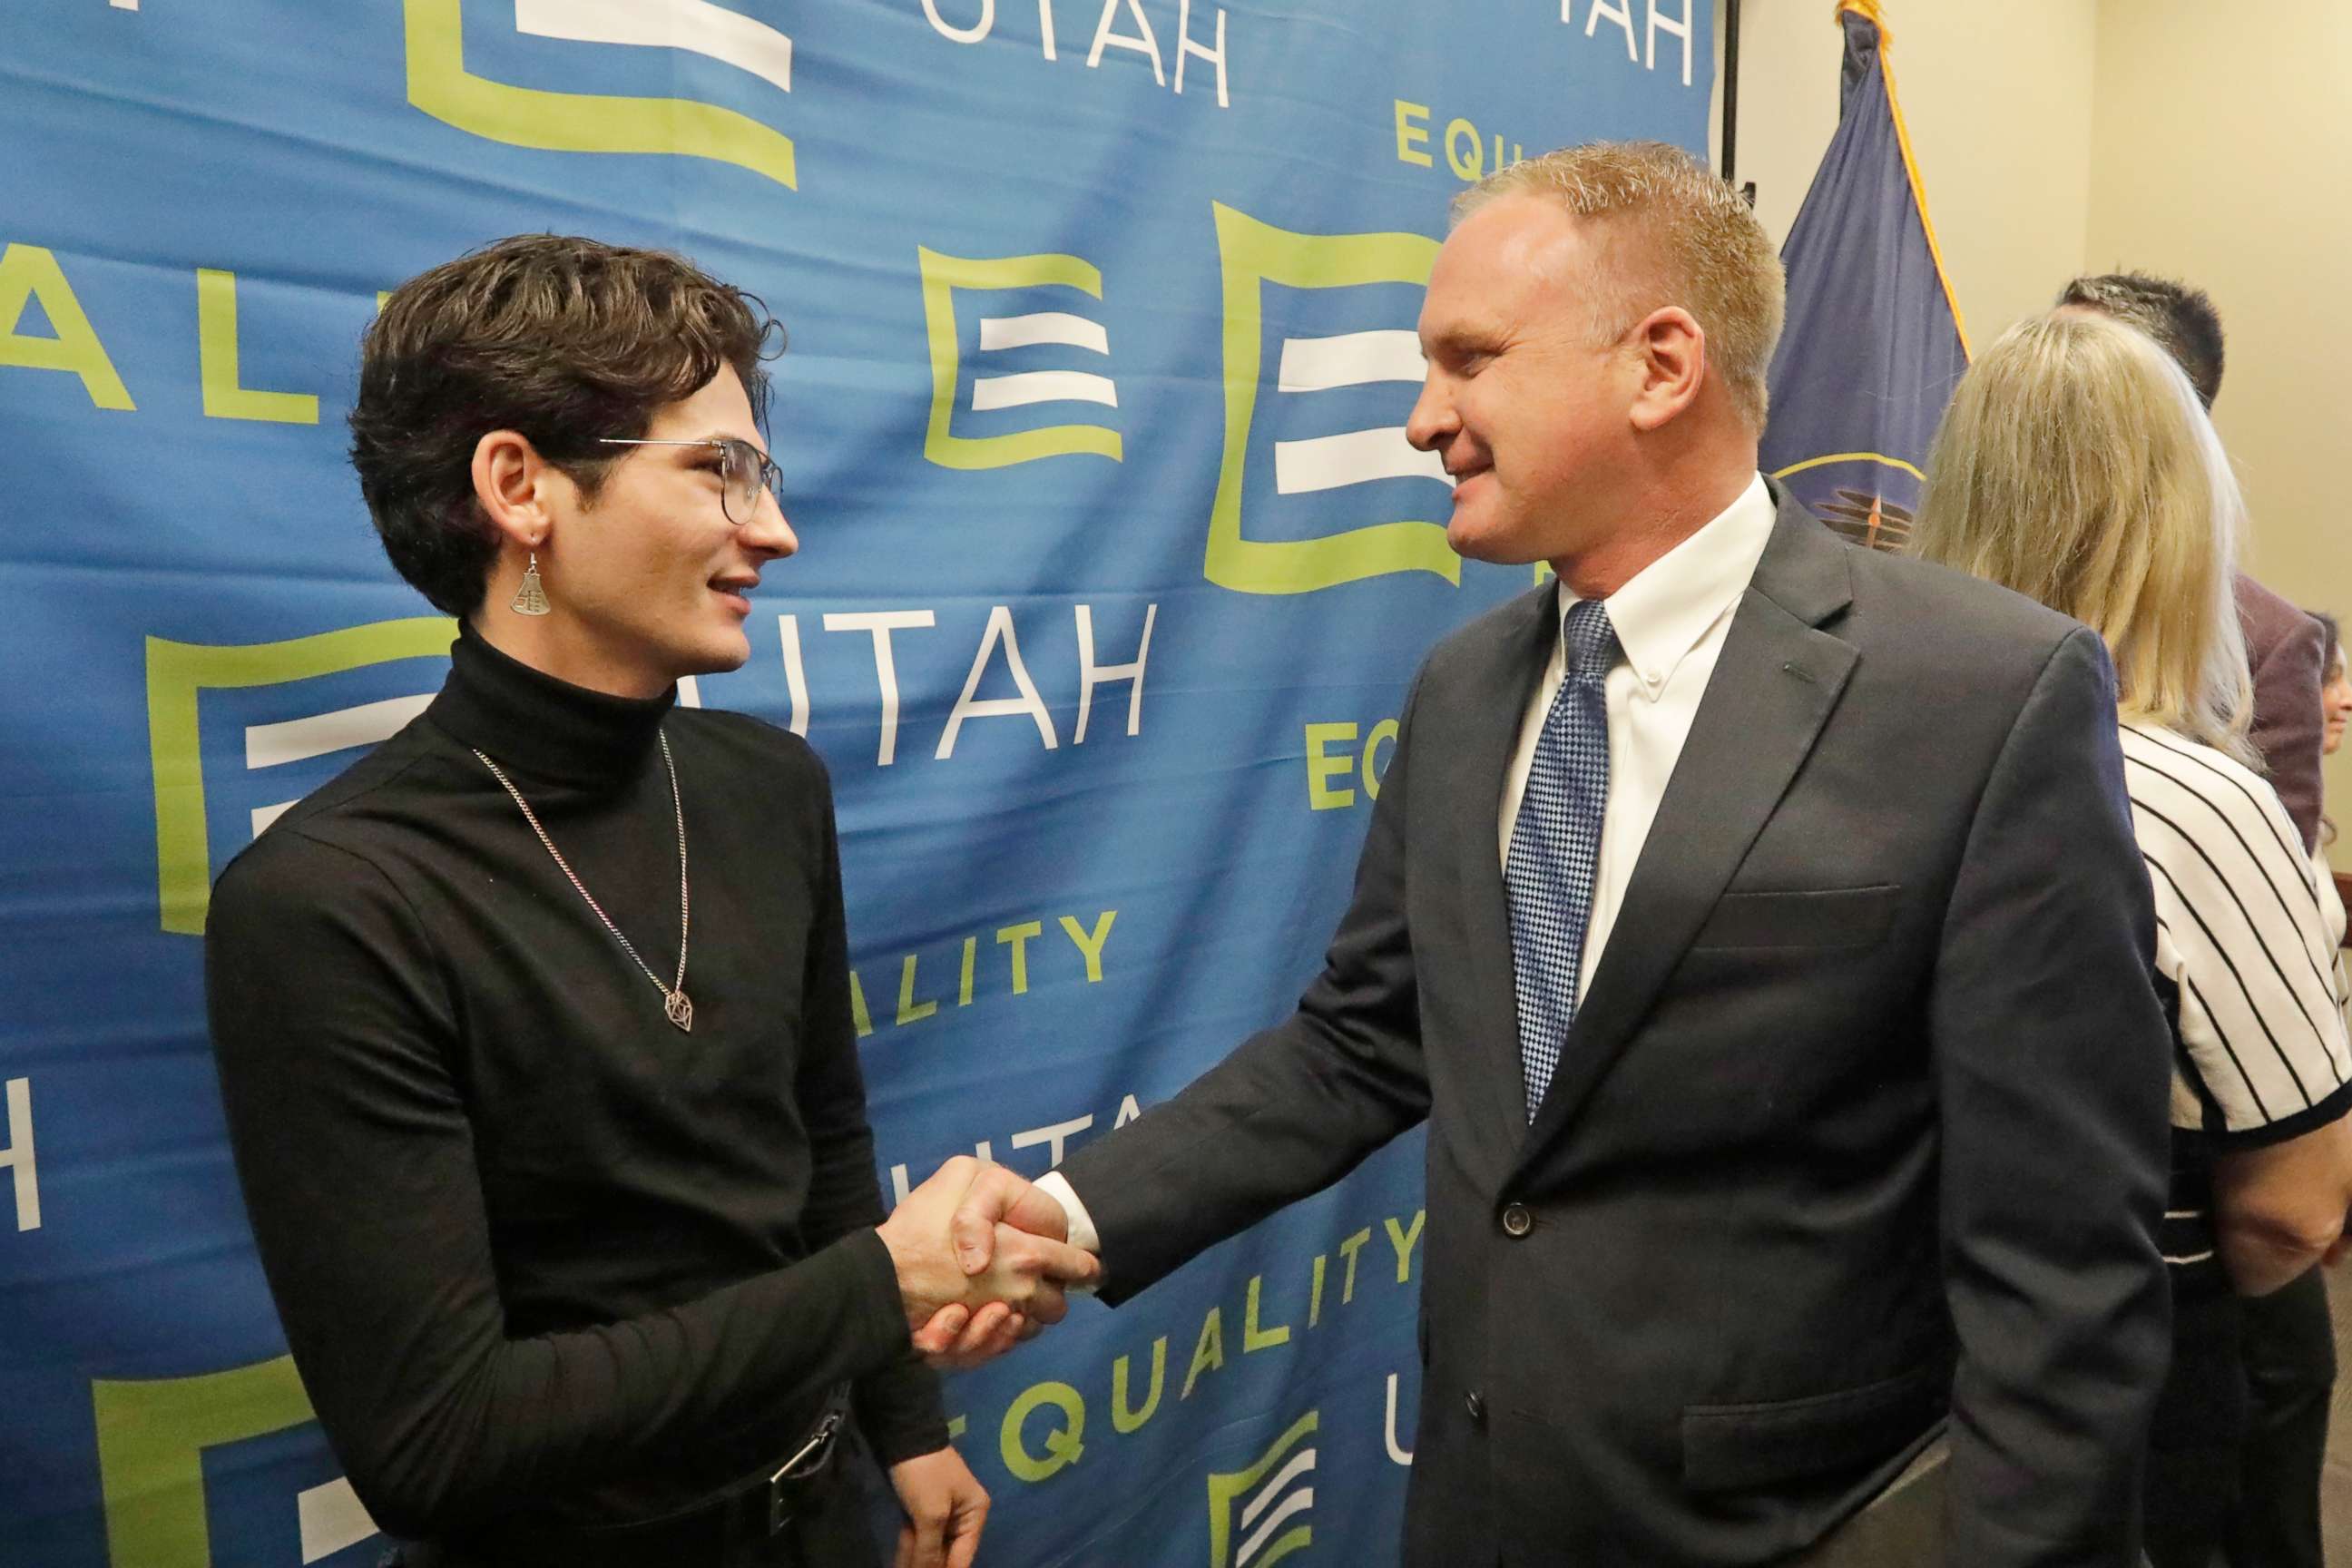 PHOTO:Nathan Dalley shakes hands with Republican Utah Rep. Craig Hall following a news conference about the discredited practice of conversion therapy for LGBTQ children, now banned in Utah, Jan. 22, 2020, at the Utah State Capitol in Salt Lake City.